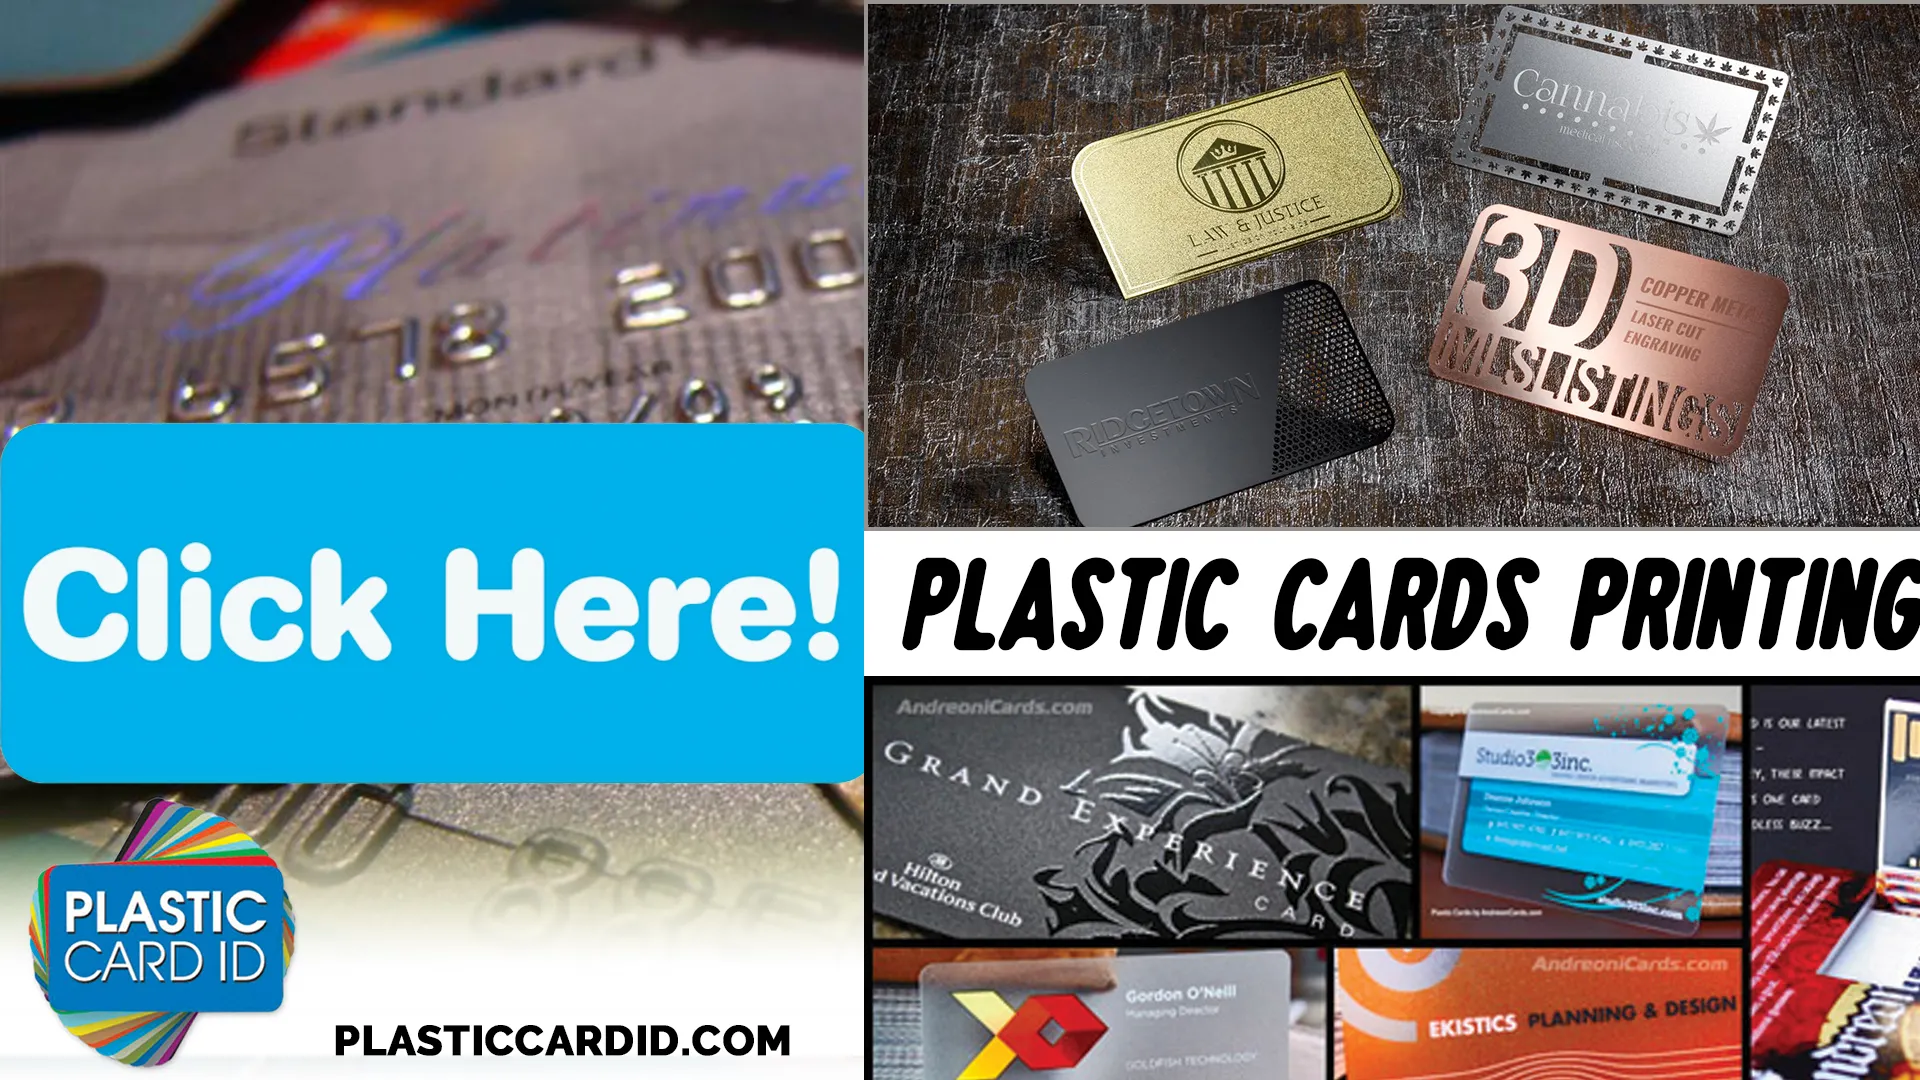 The Human Factor: Plastic Card ID
's Unmatched Customer Service